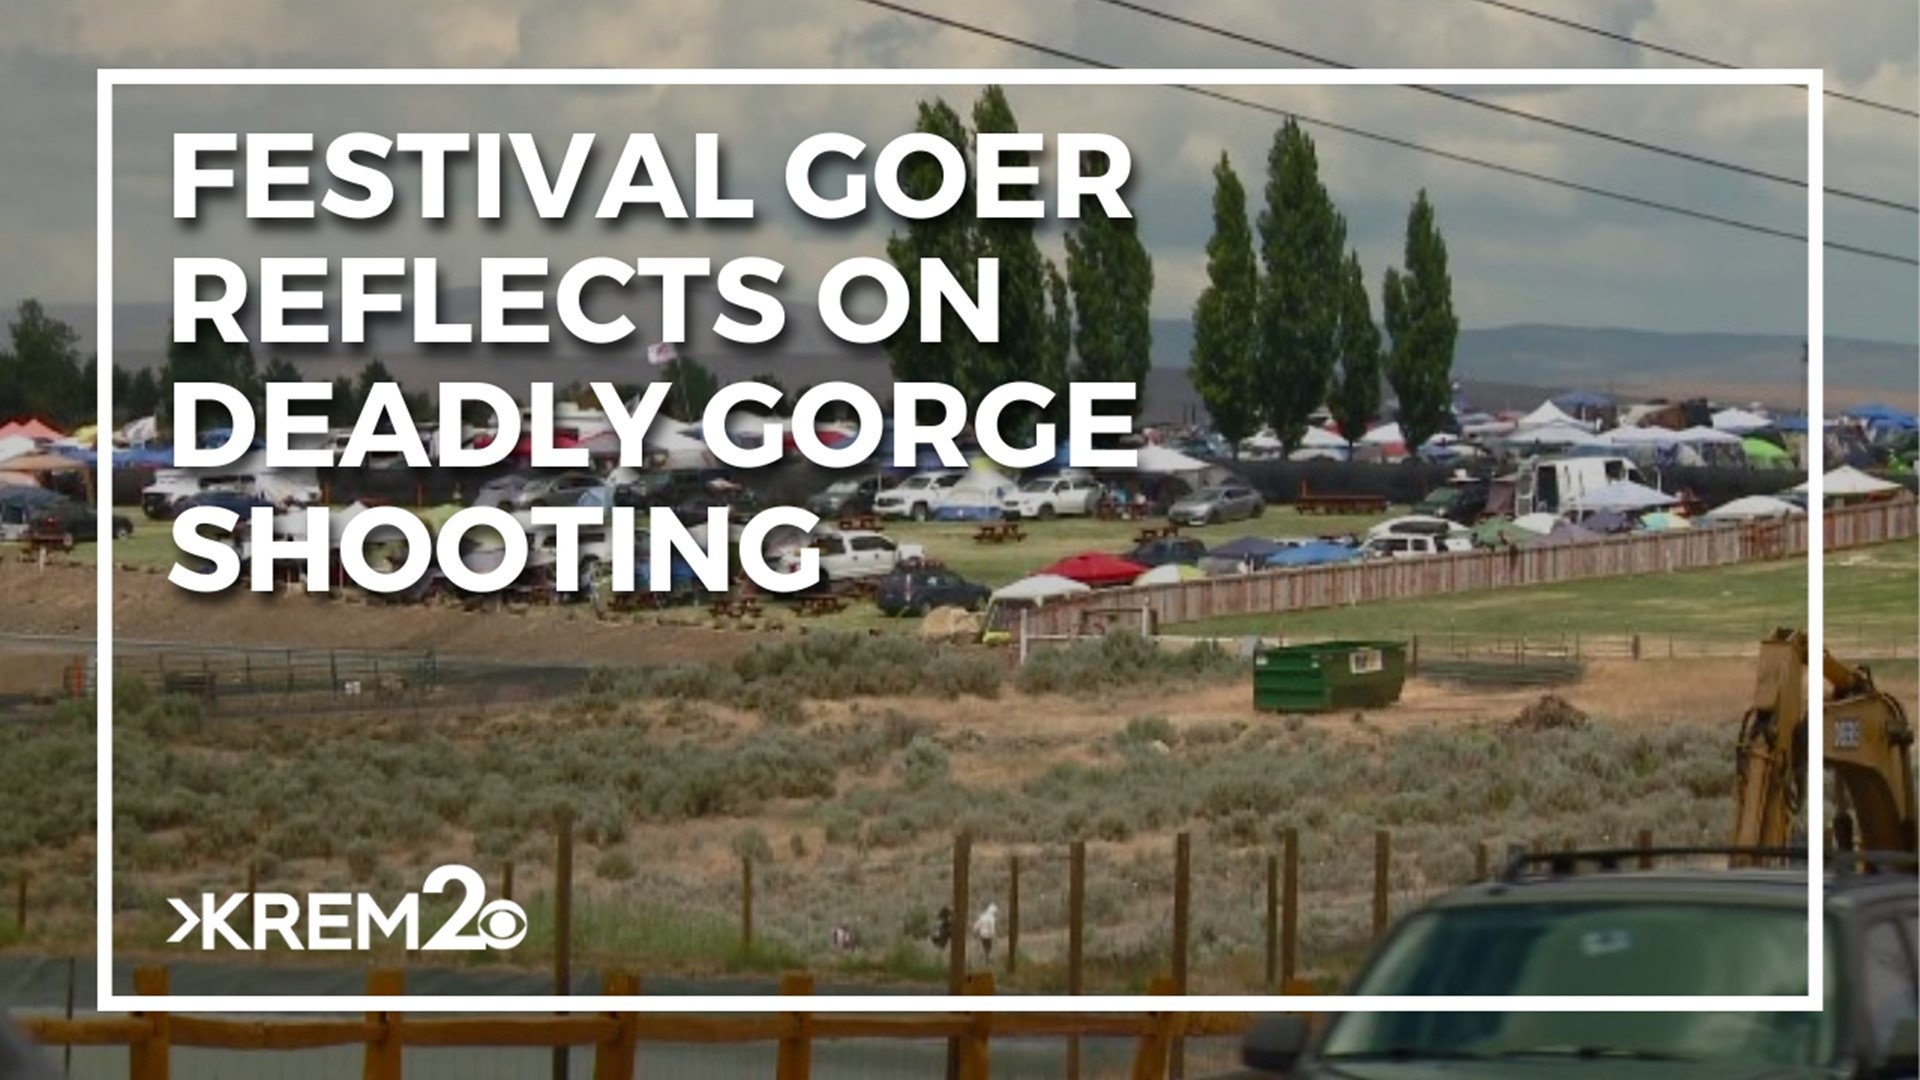 Saturday night at the Gorge, Beyond Wonderland attendee Garrett said he came face-to-face with the suspected shooter and tried to help victims.